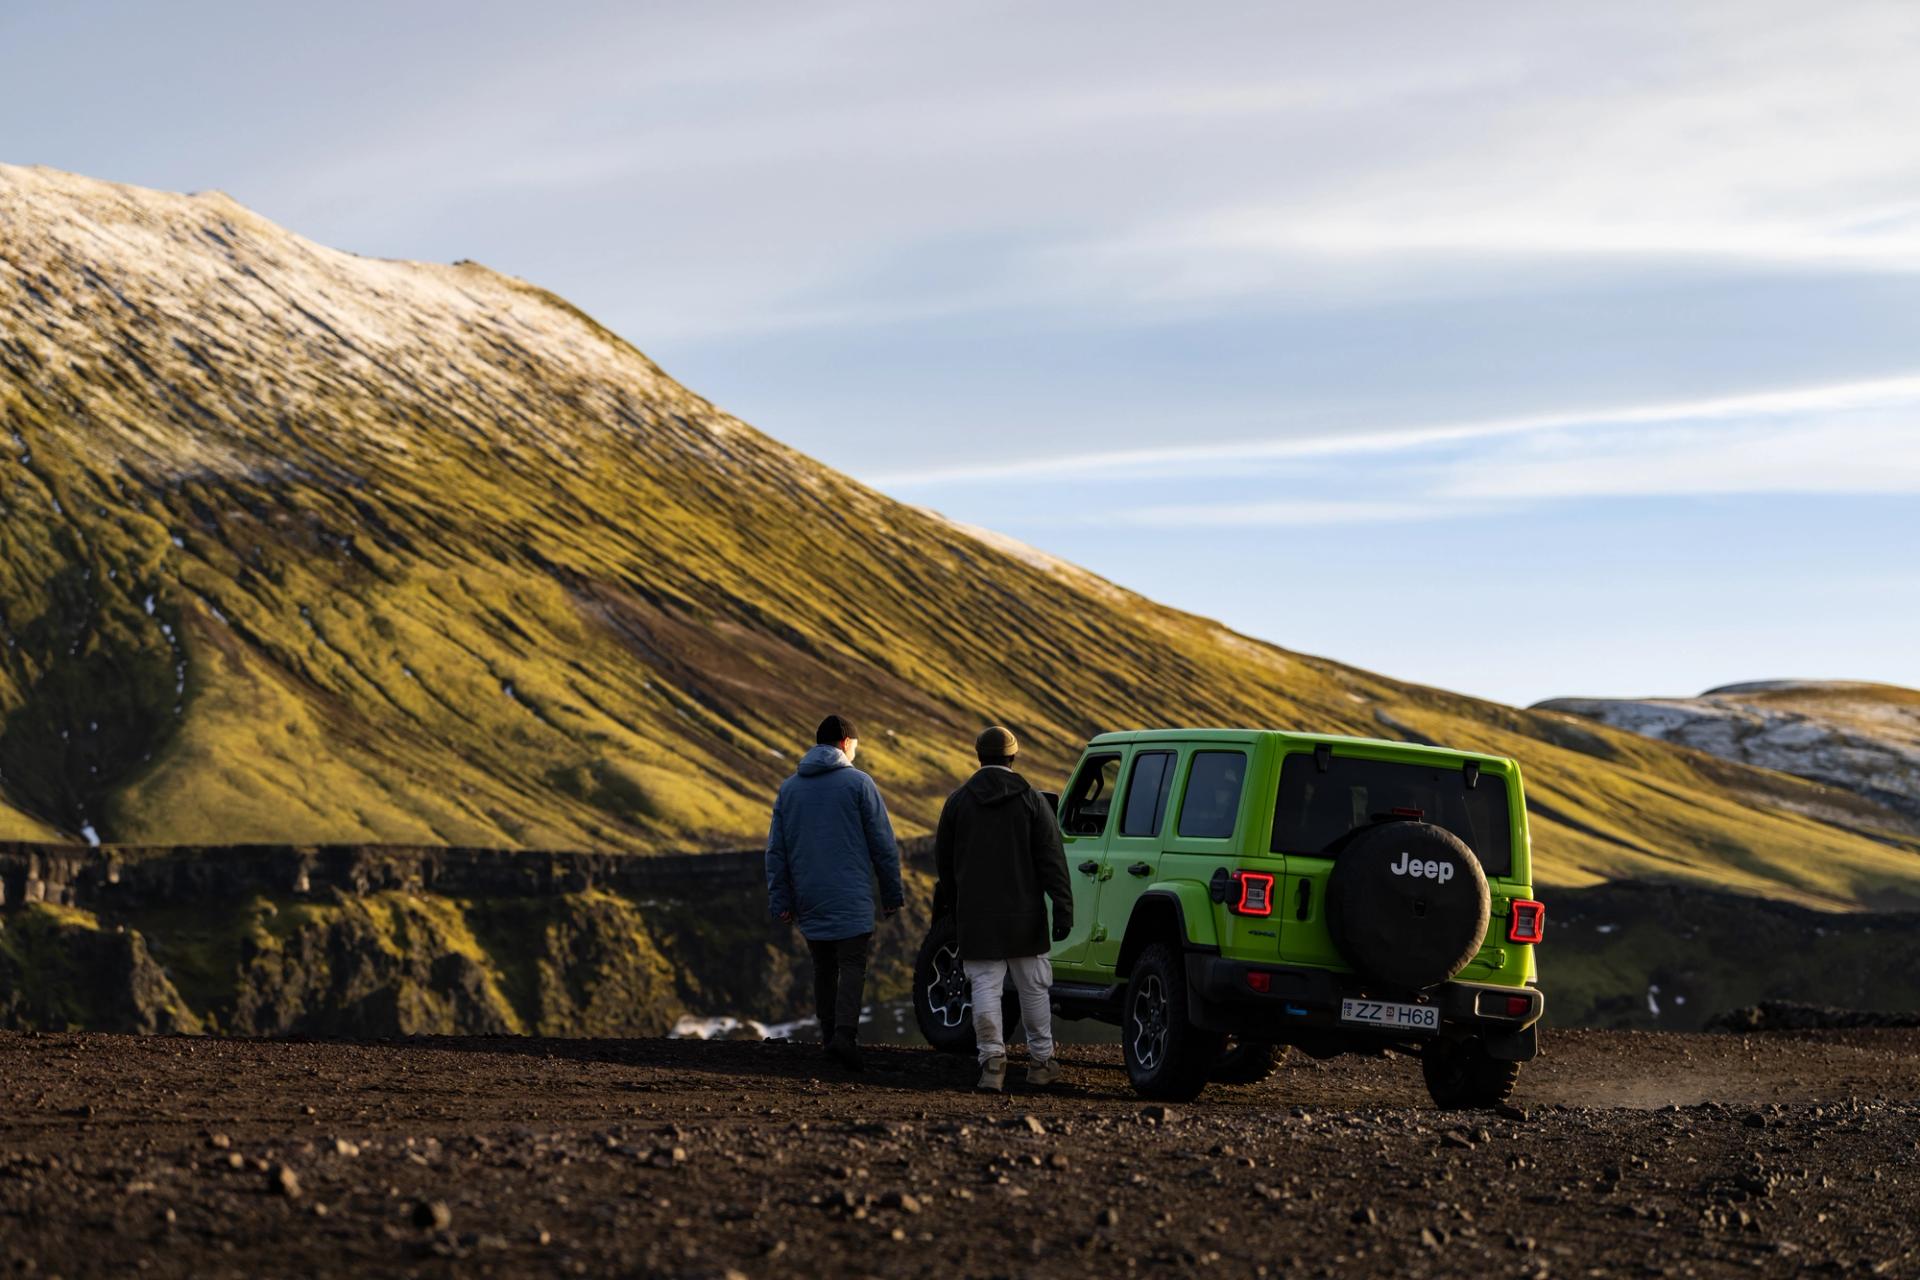 2 friends relaxing together and watching the landscape of Iceland near a Jeep rental car